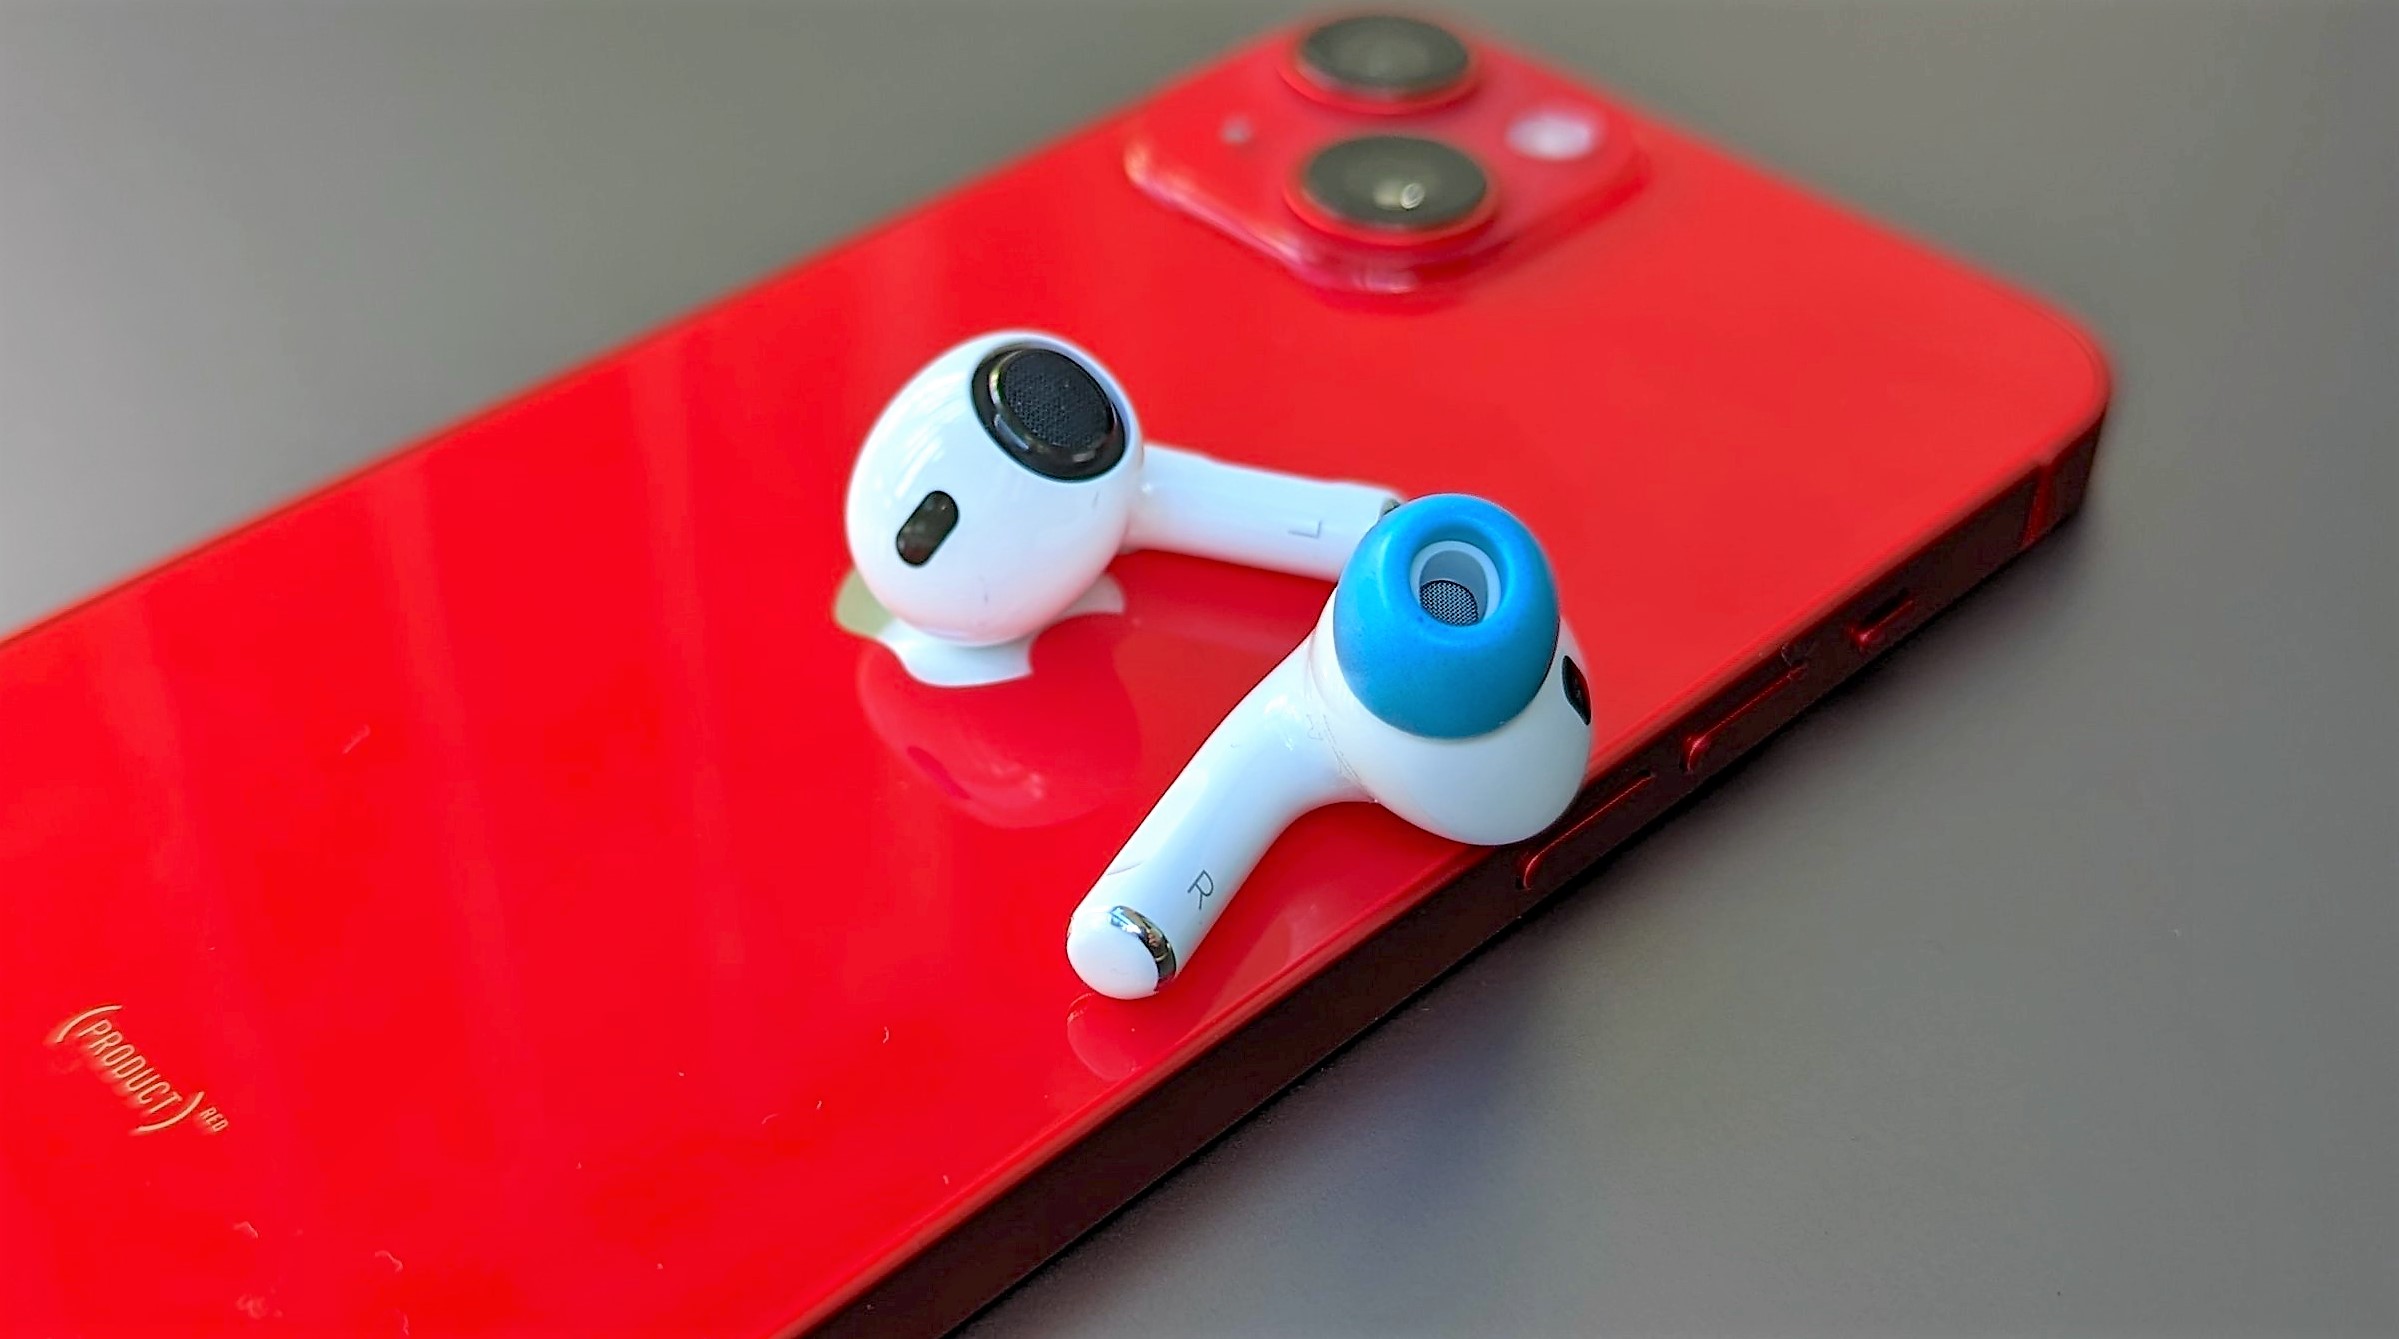 AirPods equipped with foam pads placed on top of the iPhone